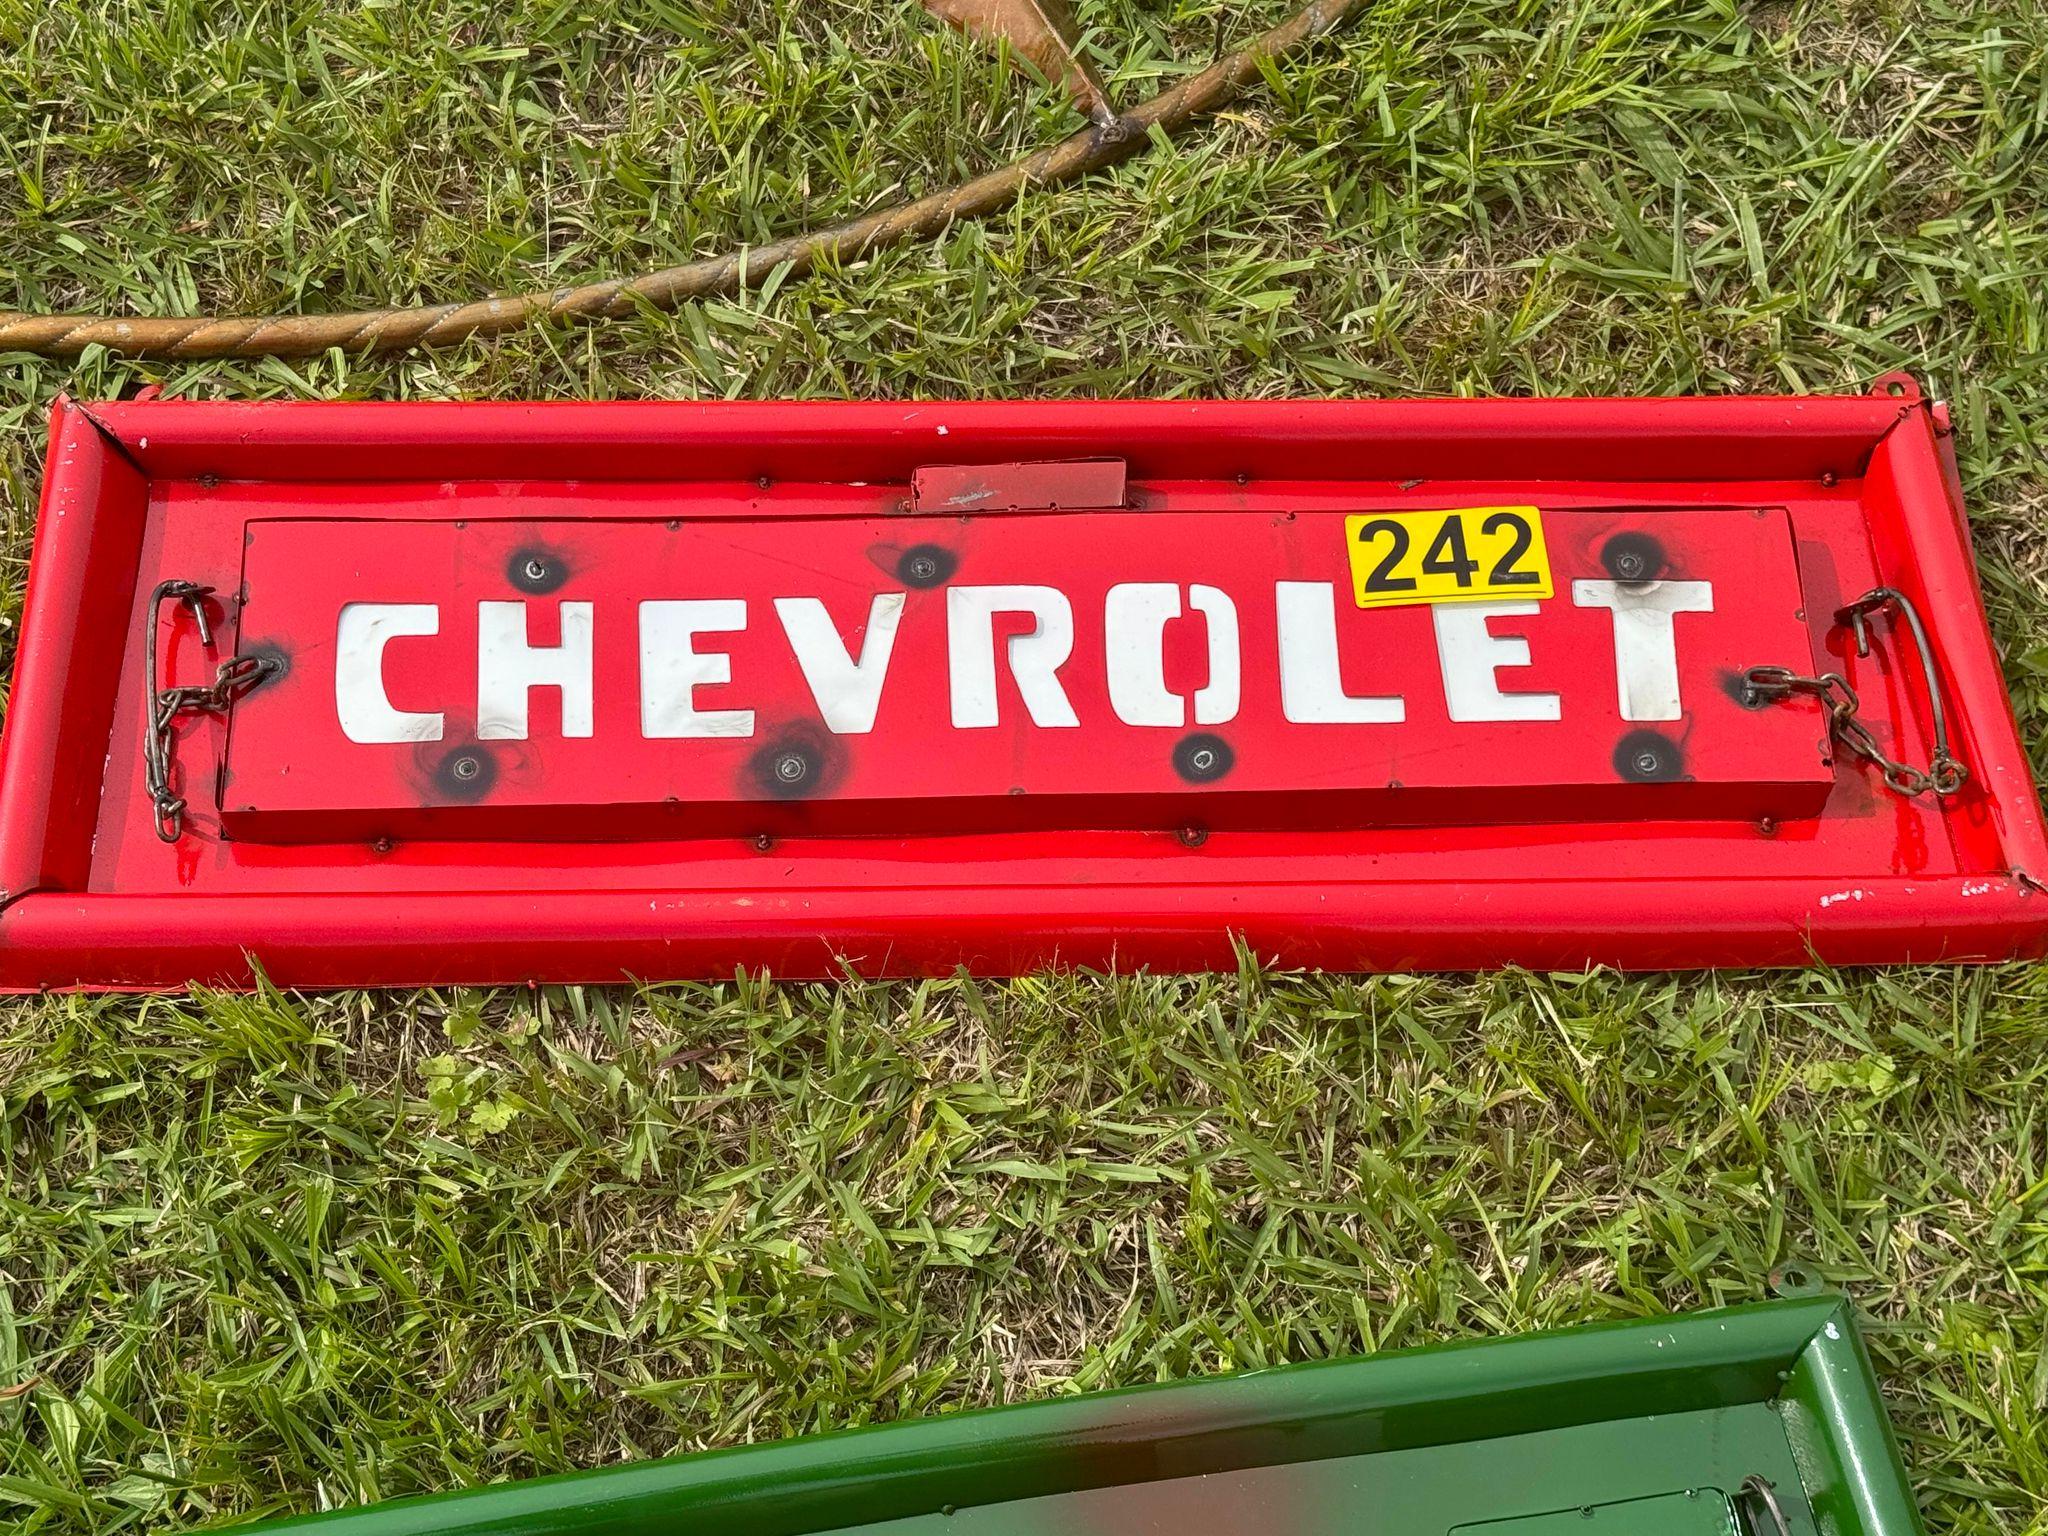 Chevy tailgate sign